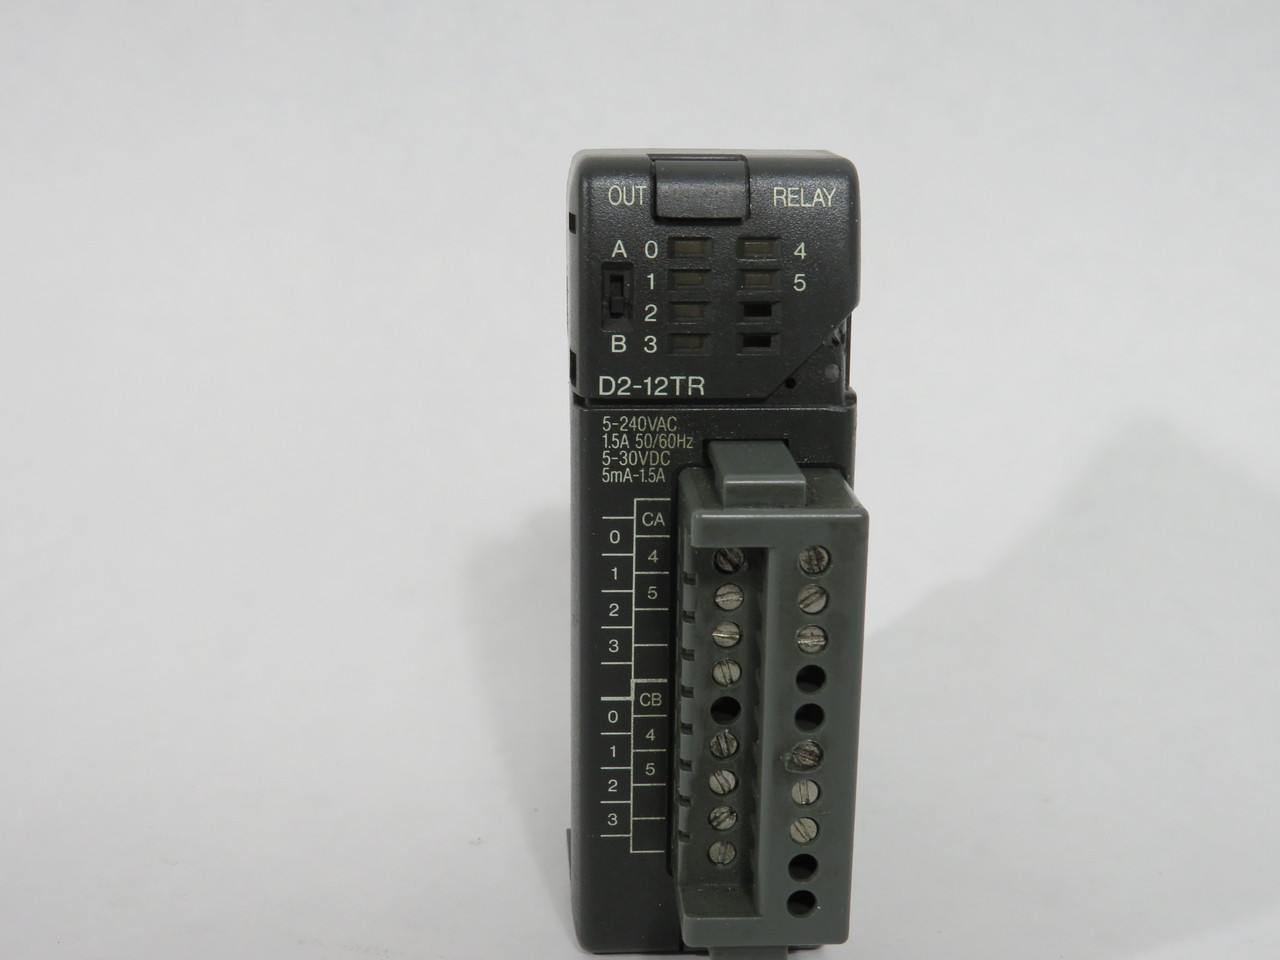 PLC Direct D2-12TR Relay Output Module 5-240AC 1.5A@50/60Hz 5-30DC@5mA 1.5A USED